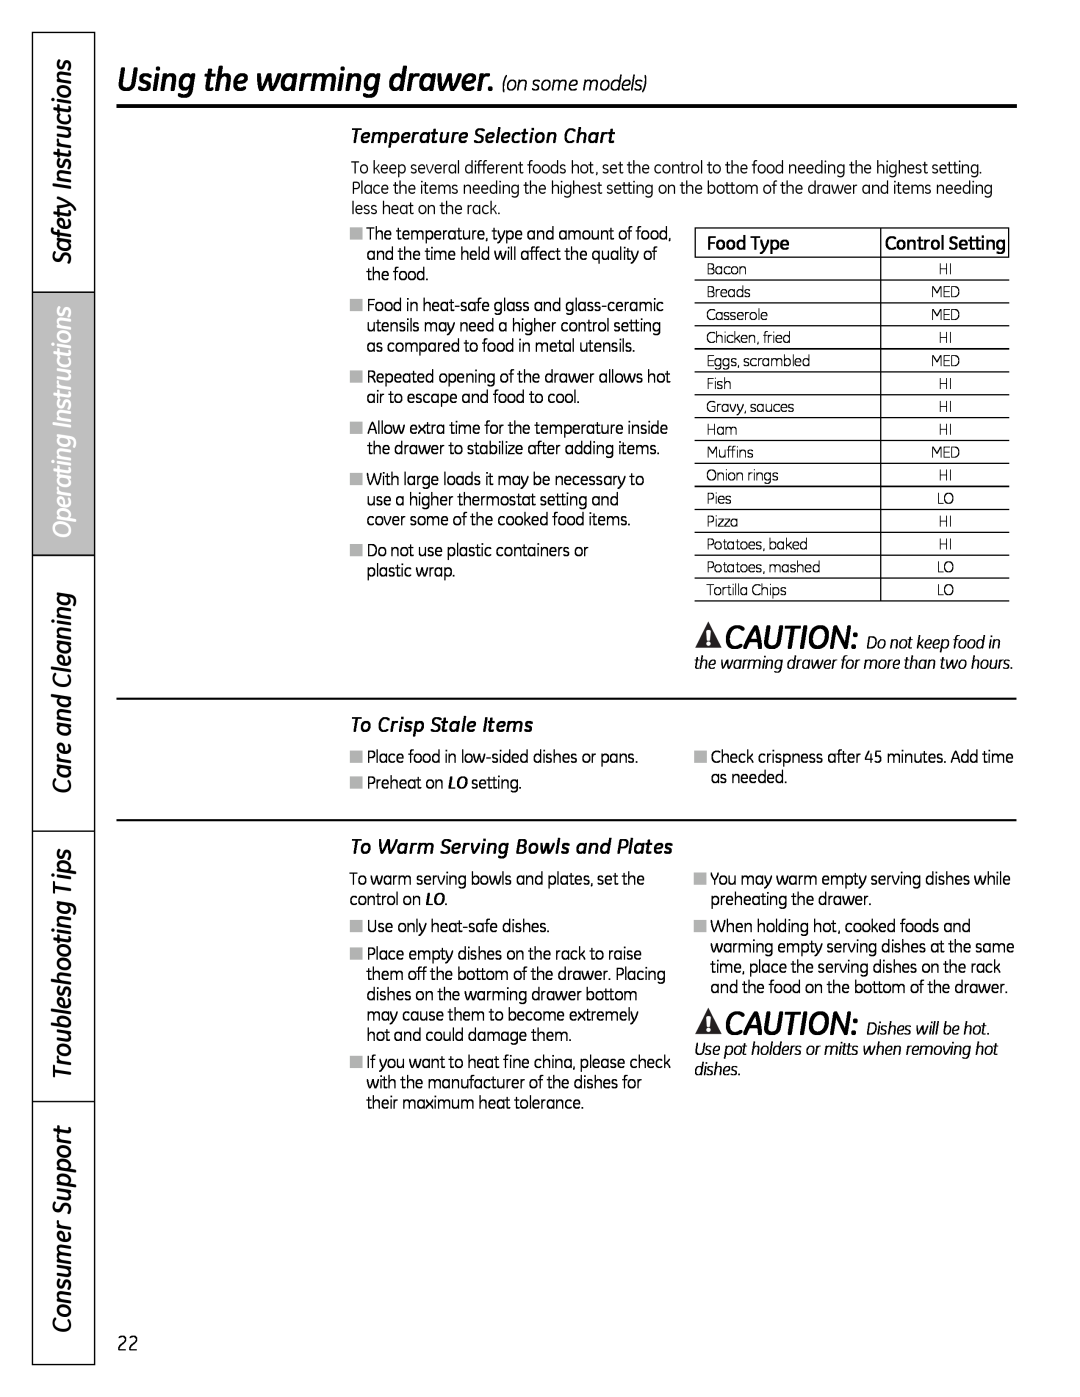 Hotpoint JBP15 Consumer Support Troubleshooting Tips, Care and Cleaning, Temperature Selection Chart, To Crisp Stale Items 